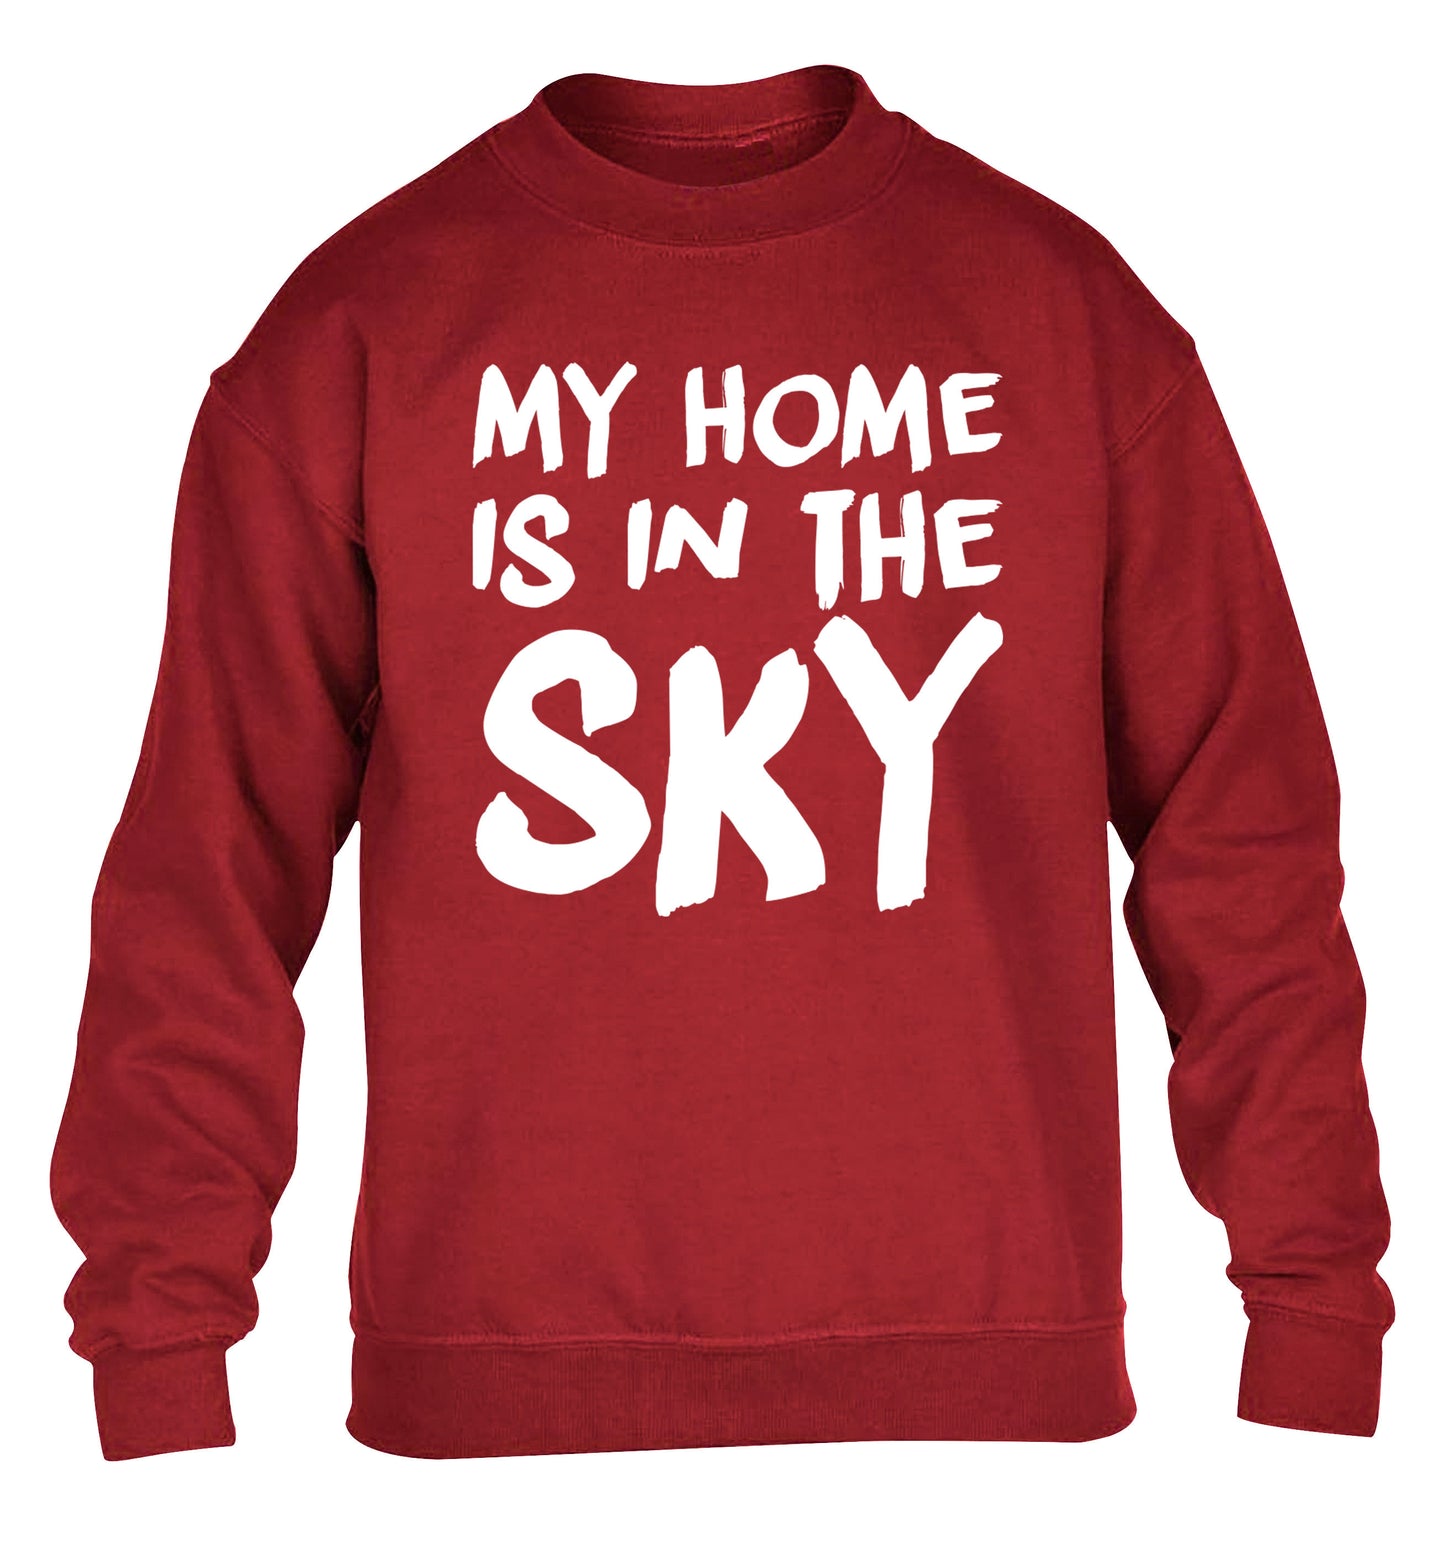 My home is in the sky children's grey sweater 12-14 Years